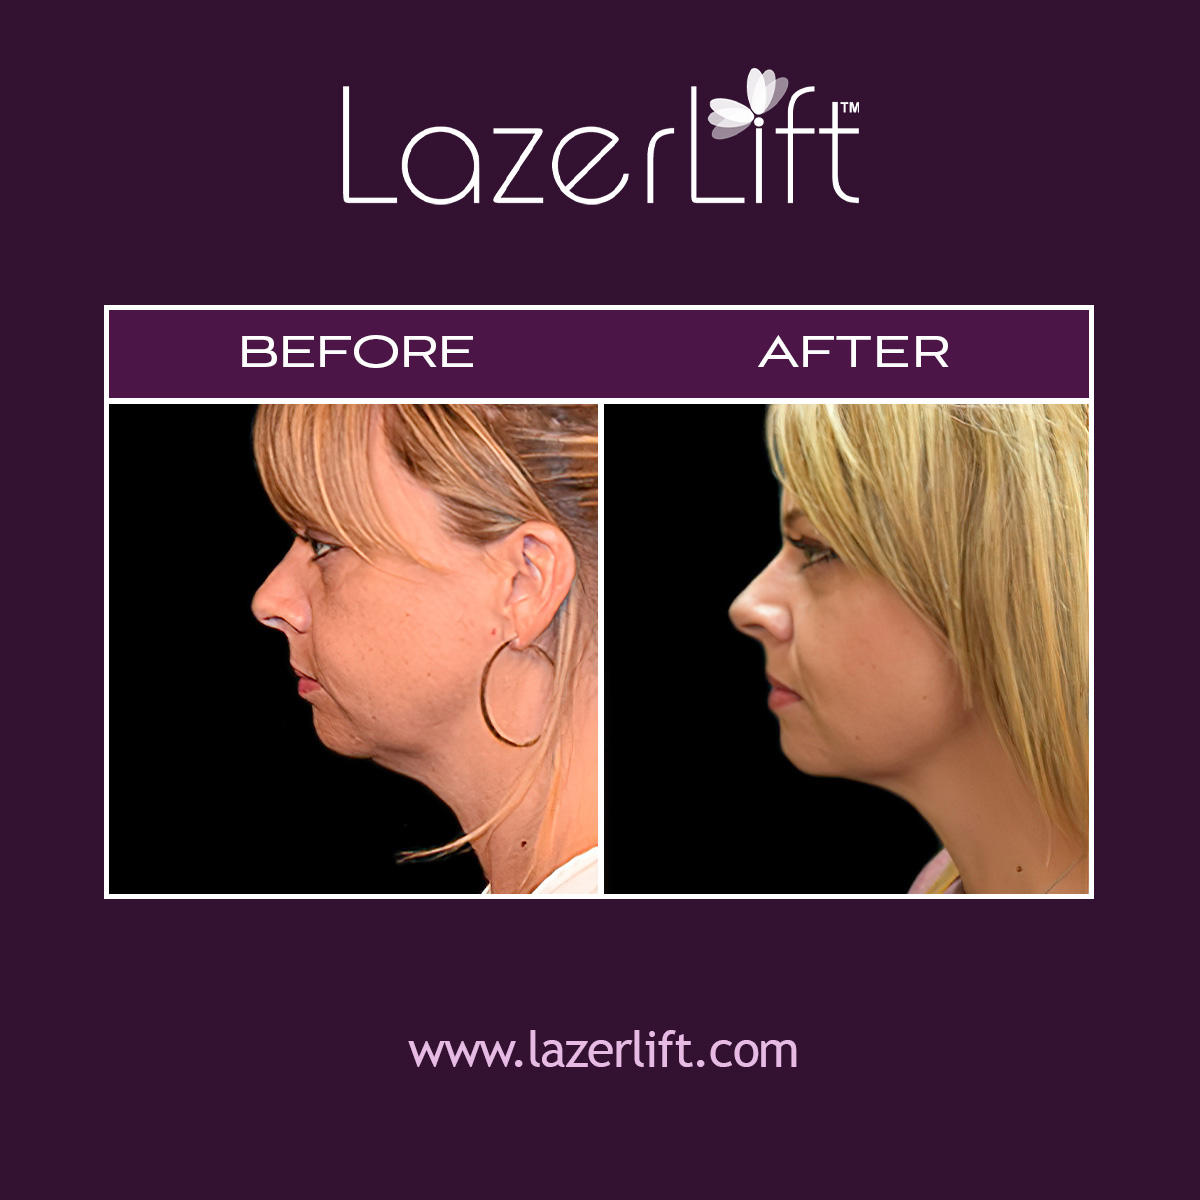 Our skilled plastic surgeons offer laser face lift in Orlando. LazerLift® is successful in tightening the skin on the face to create a youthful-looking appearance. LazerLift® targets beneath the surface of the skin to plump cheeks, reduce fine lines, and lift the cheekbones. The LazerLift® procedure is minimally invasive and provides patients with long-lasting results.